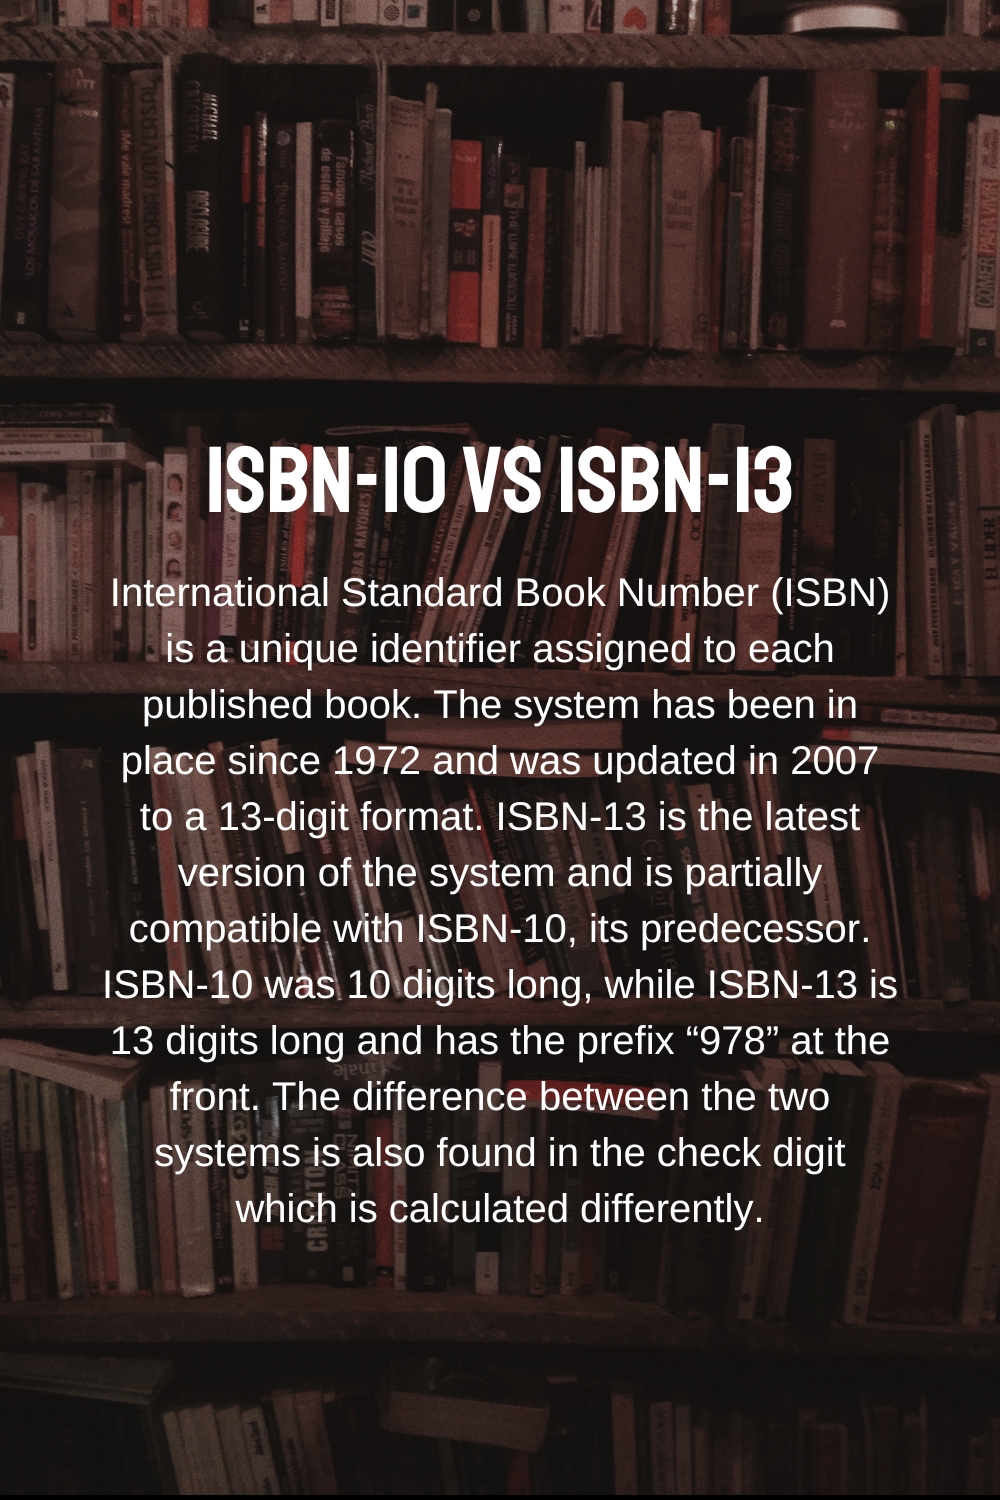 difference between ISBN-10 and ISBN-13